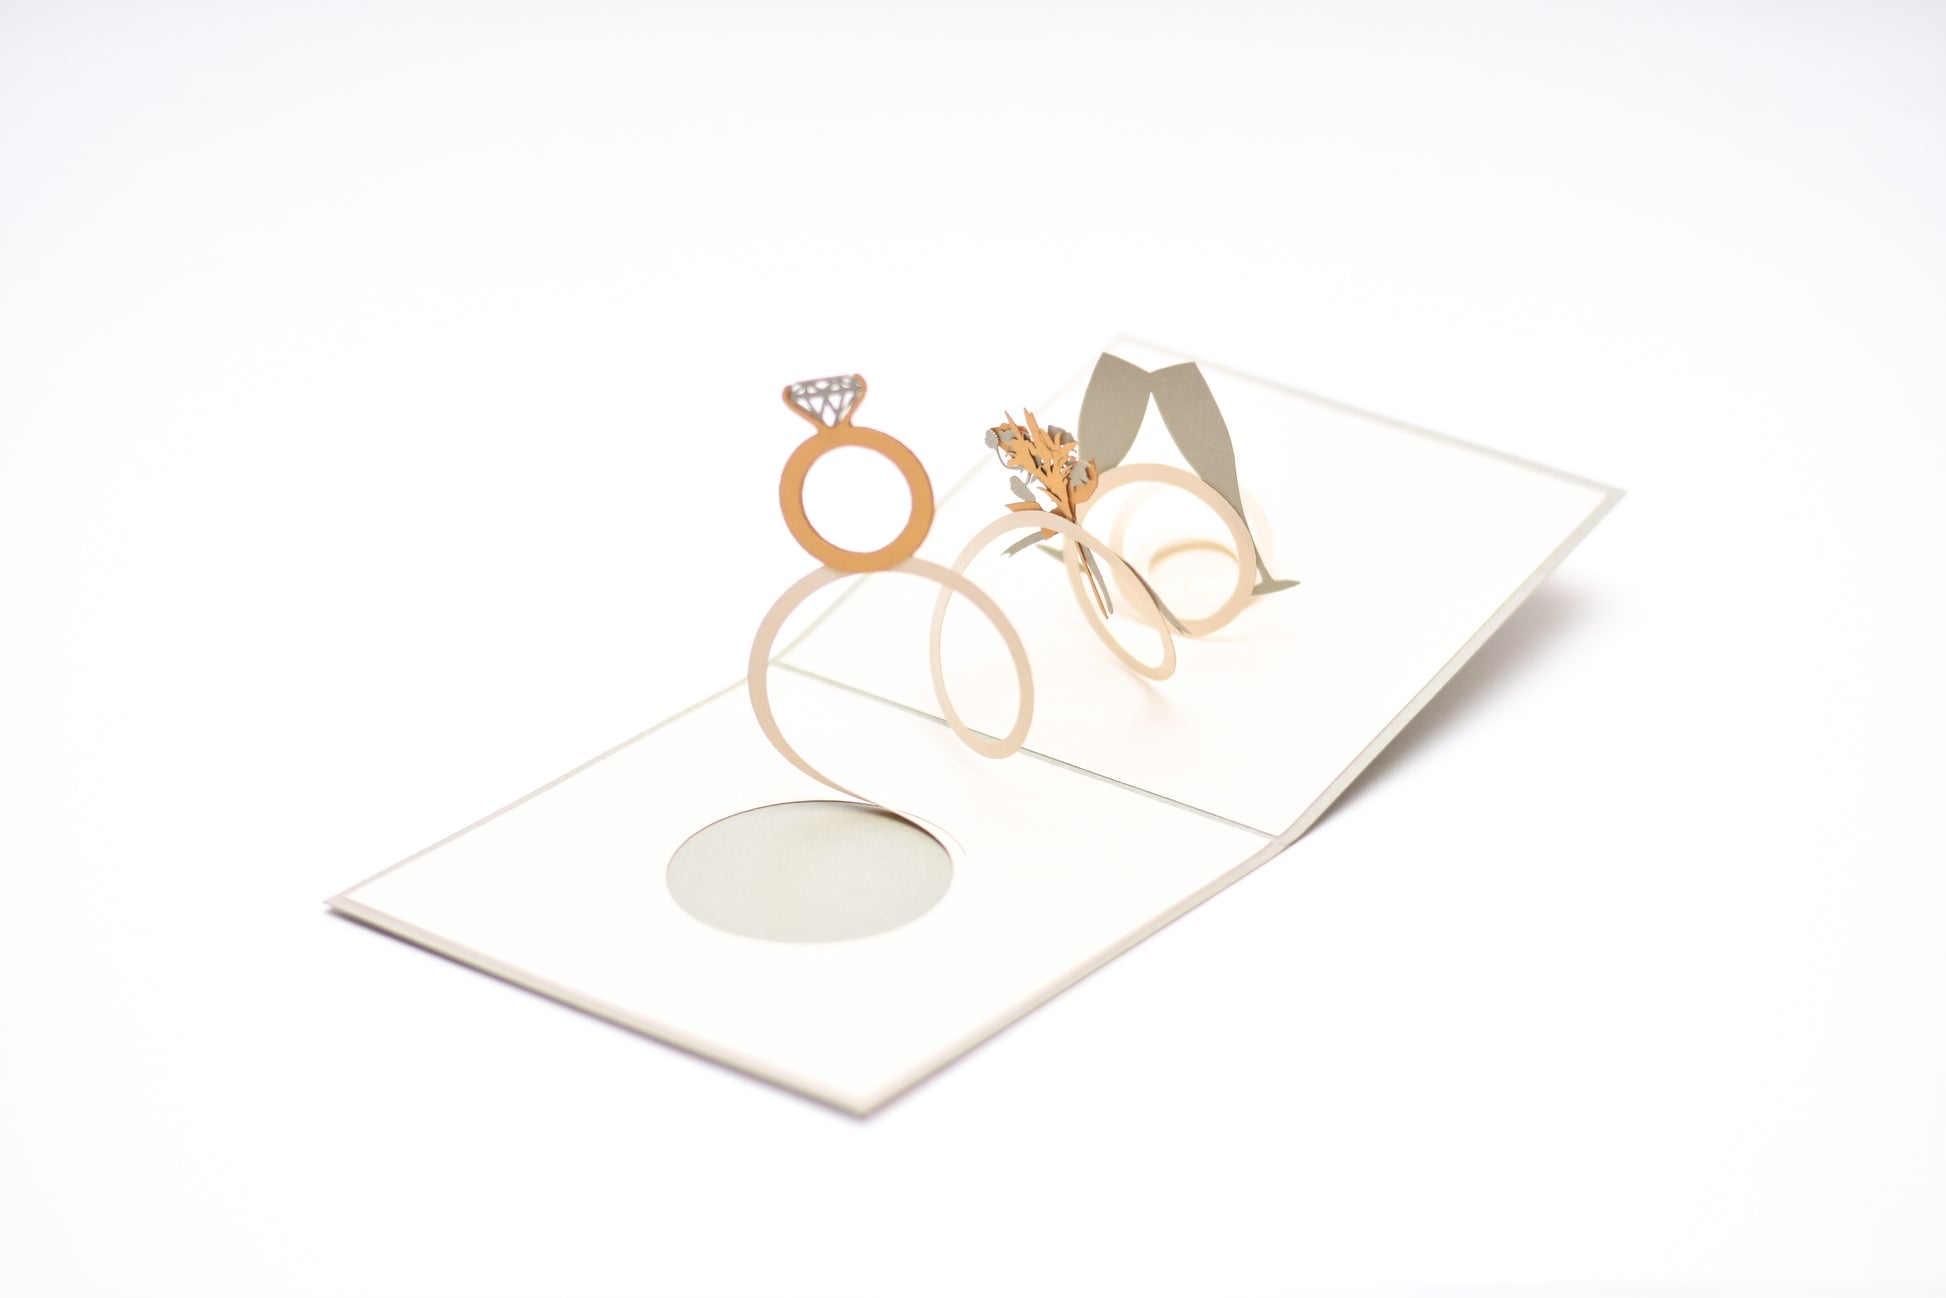 This white pop-up card opens up to a diamond gold ring, a bouquet of flowers and two glasses of champagne.